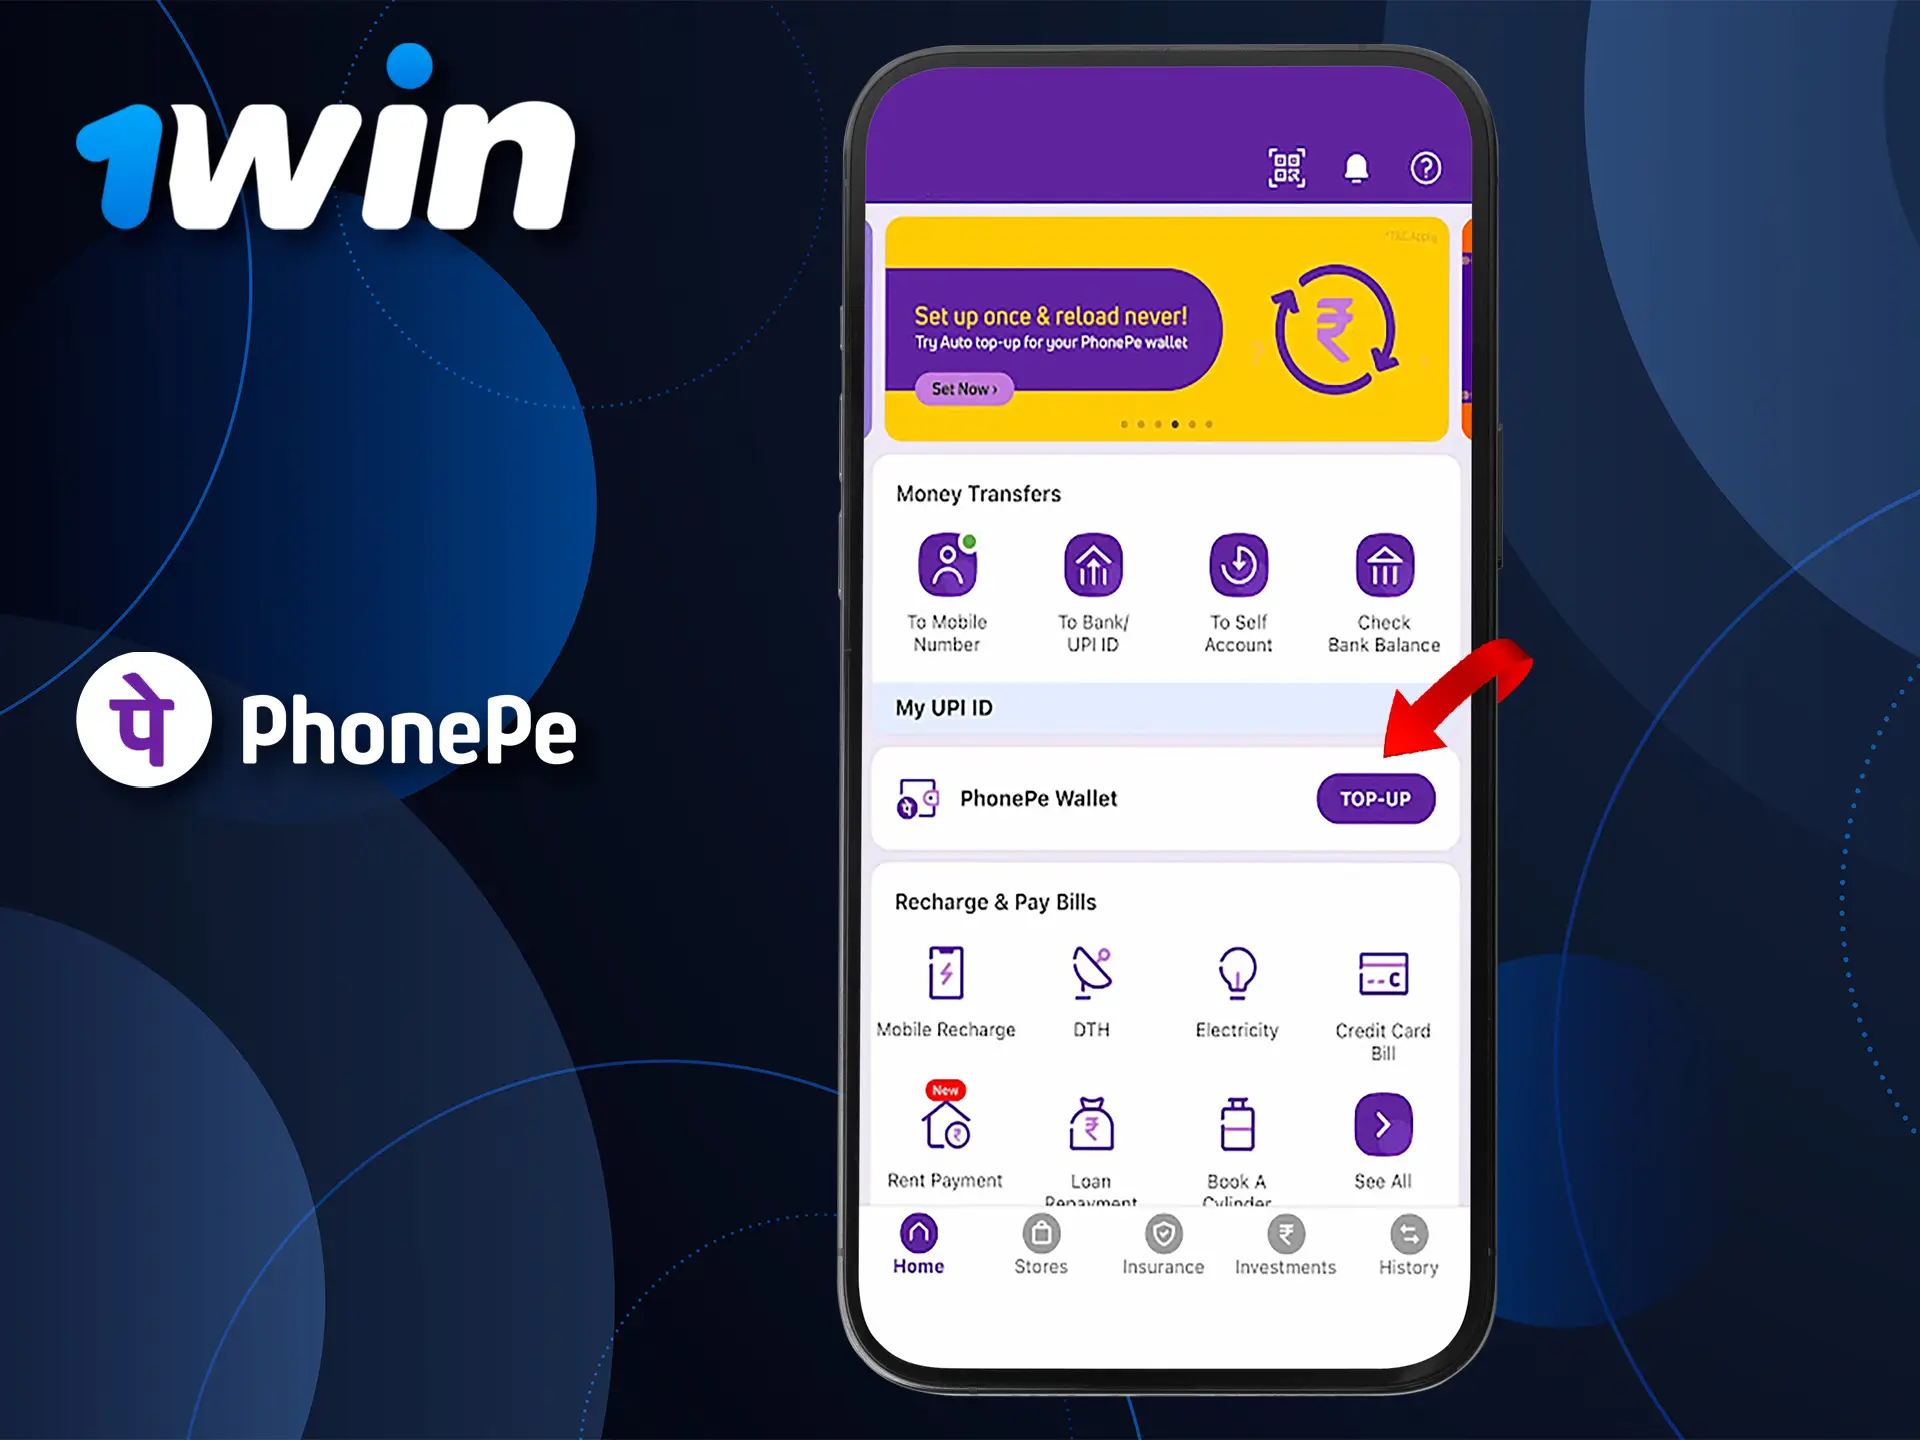 Add your card to PhonePe and make your first wallet top-up.